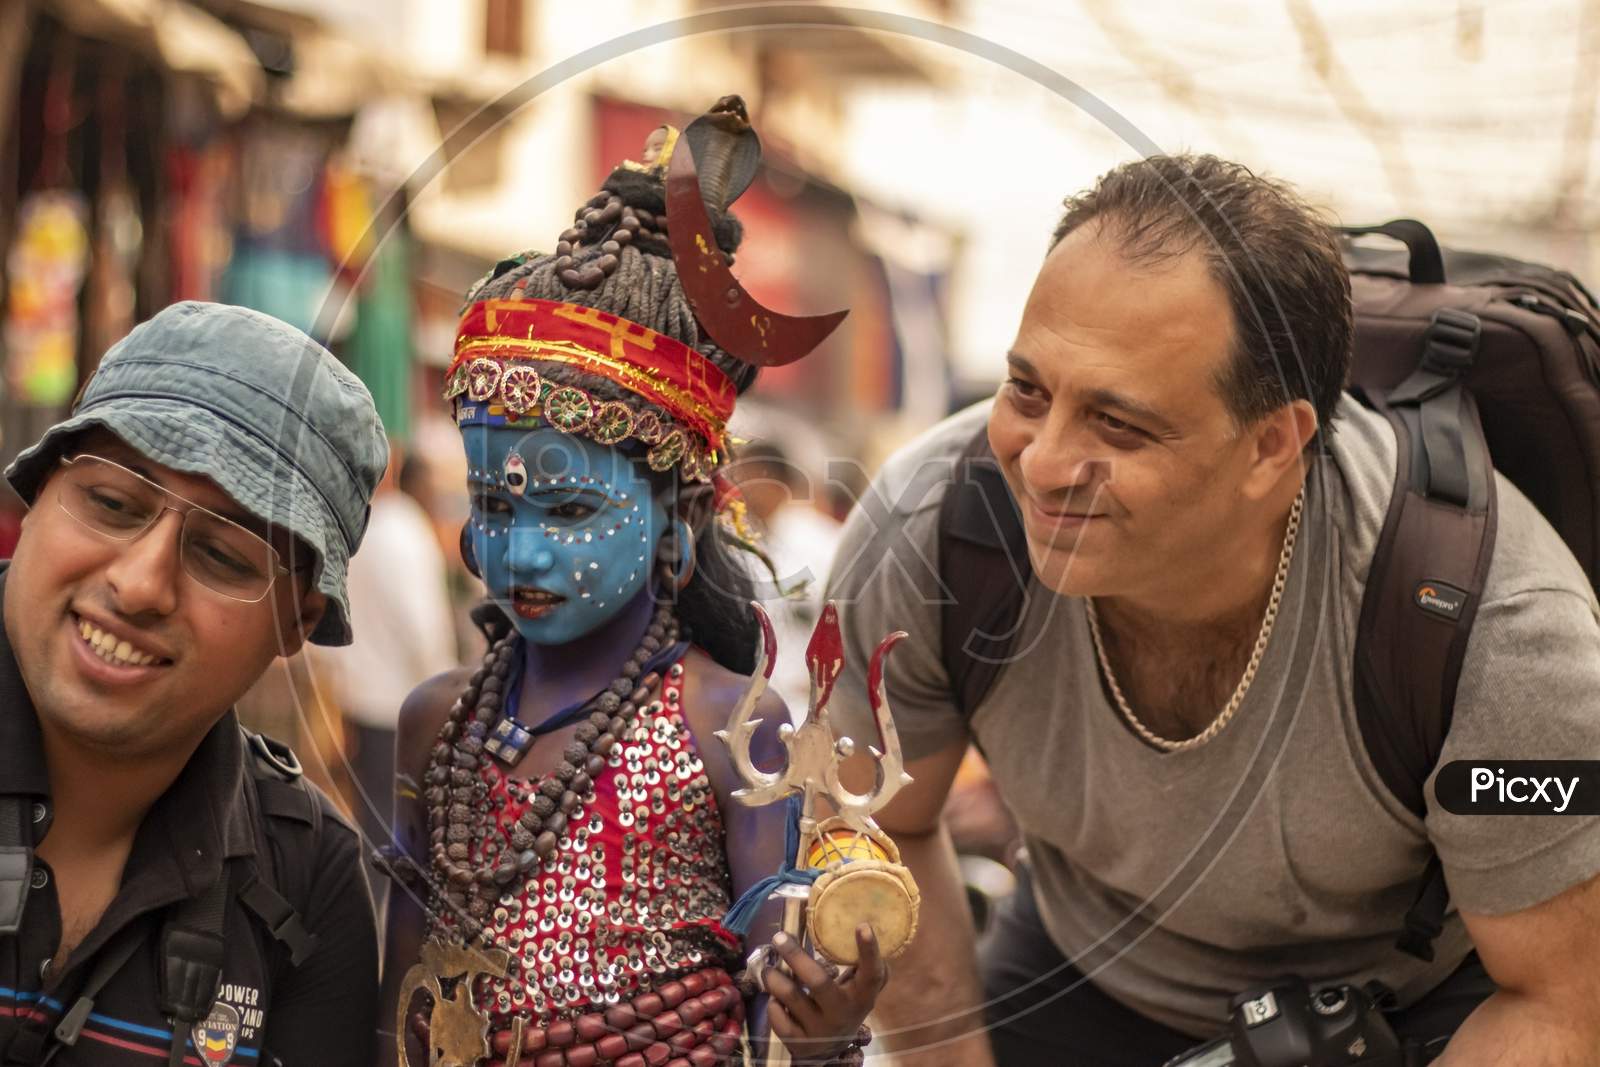 A poor kid dressed as lord Shiva became center of attraction among tourists in Pushkar Fair